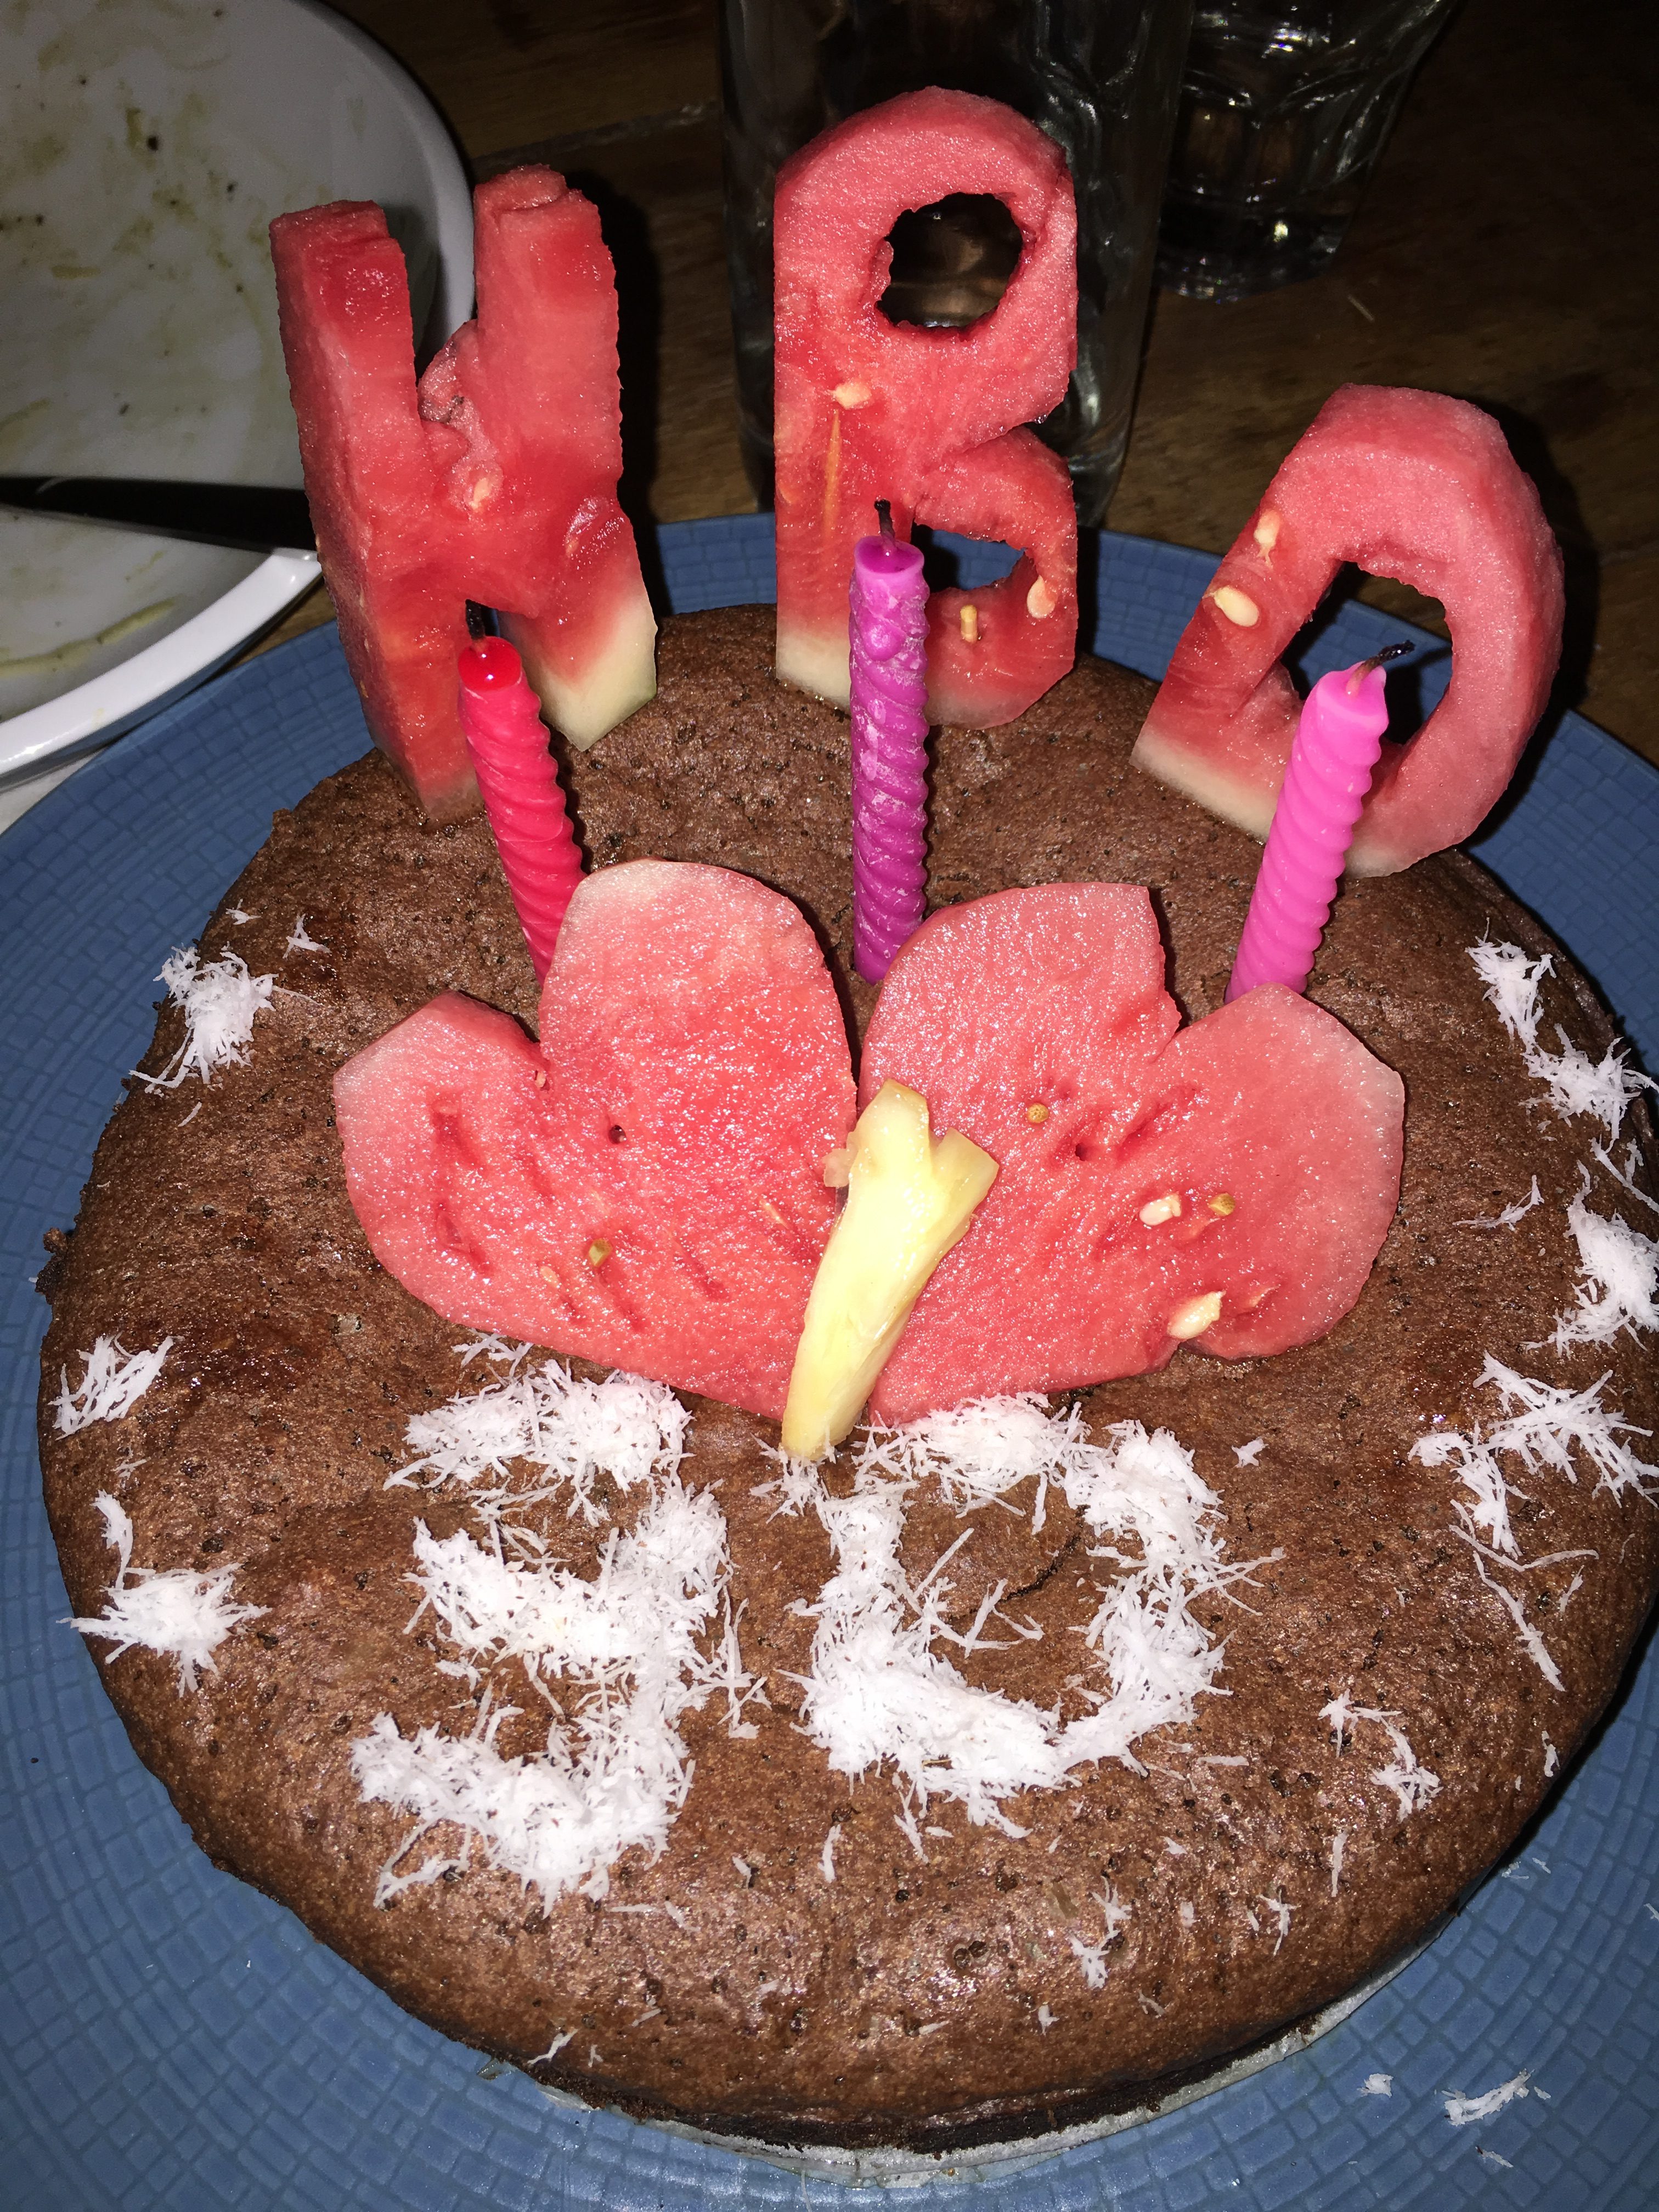 Delicious chocolate birthday cake from Blue Earth Village in Amed, Bali